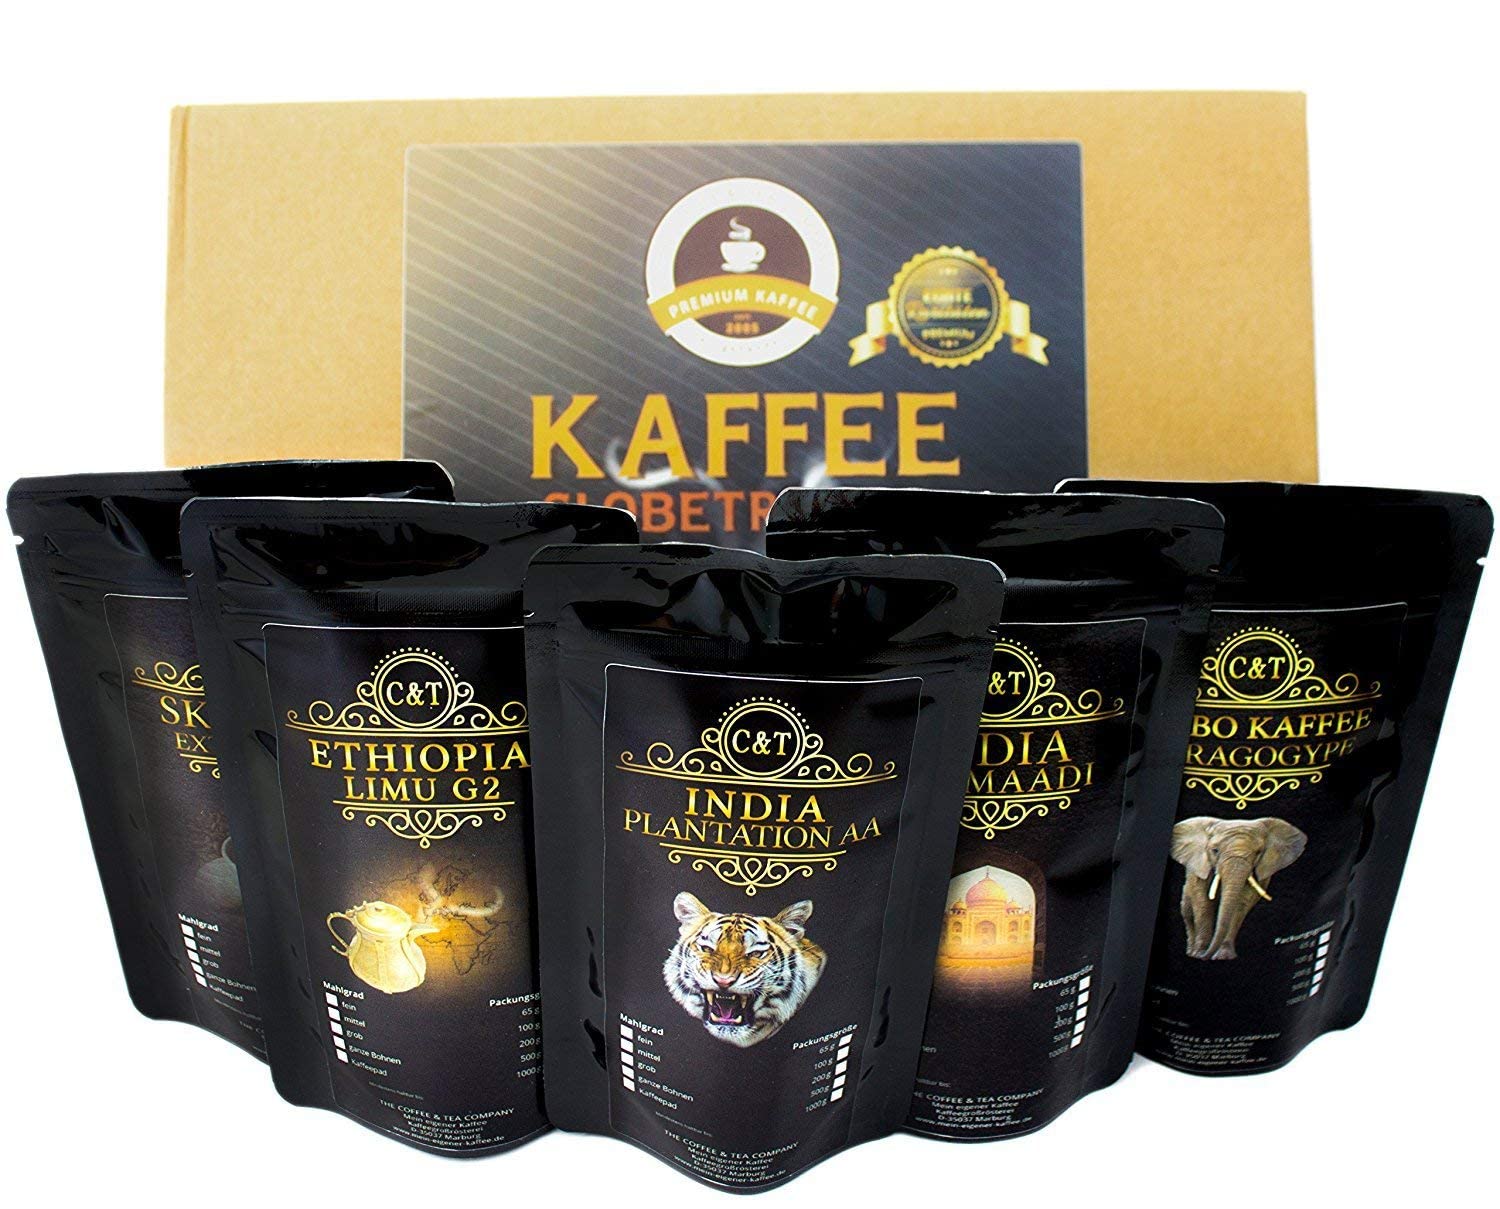 Coffee globetrotter - real rarities - box (whole bean) - 5 times 100g rarities top coffee - they become a discoverer - gift set - countries coffee from all over the world - coffee beans in the gift box